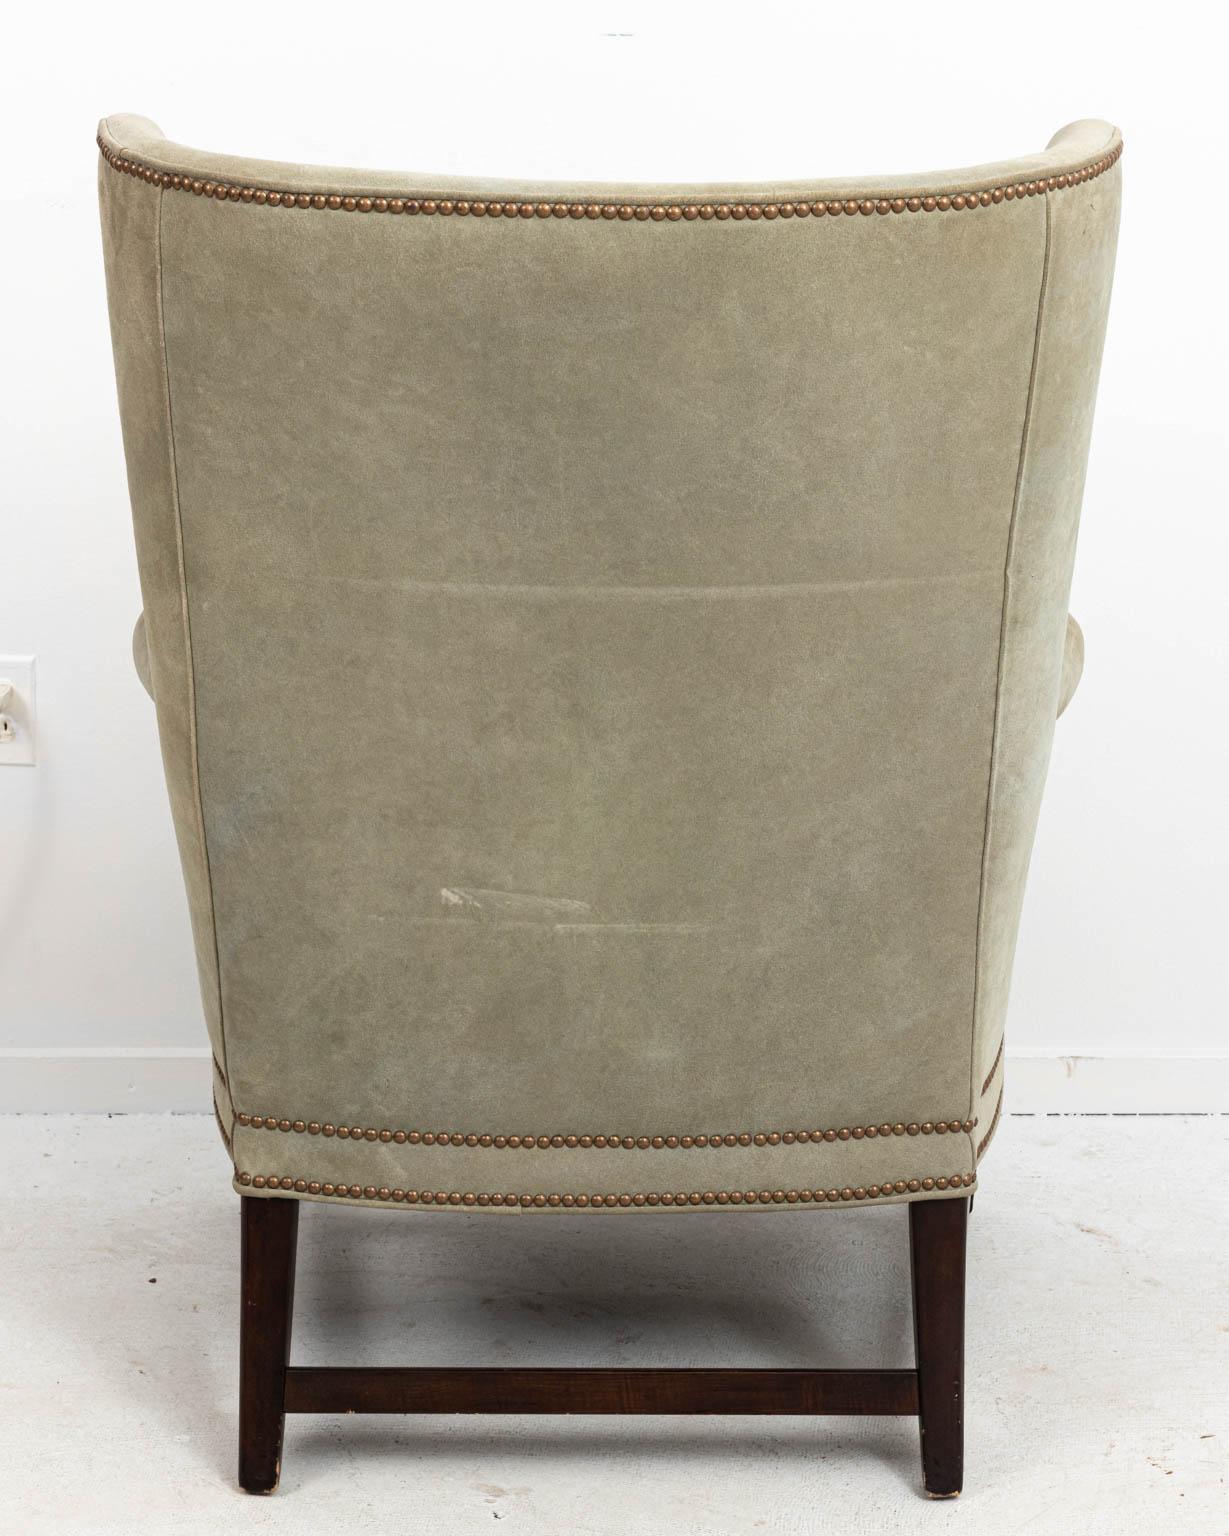 Contemporary pair of green suede upholstered wing back armchairs with tufted backs and metal nail head trim. Please note of wear consistent with age. Made in the United States.